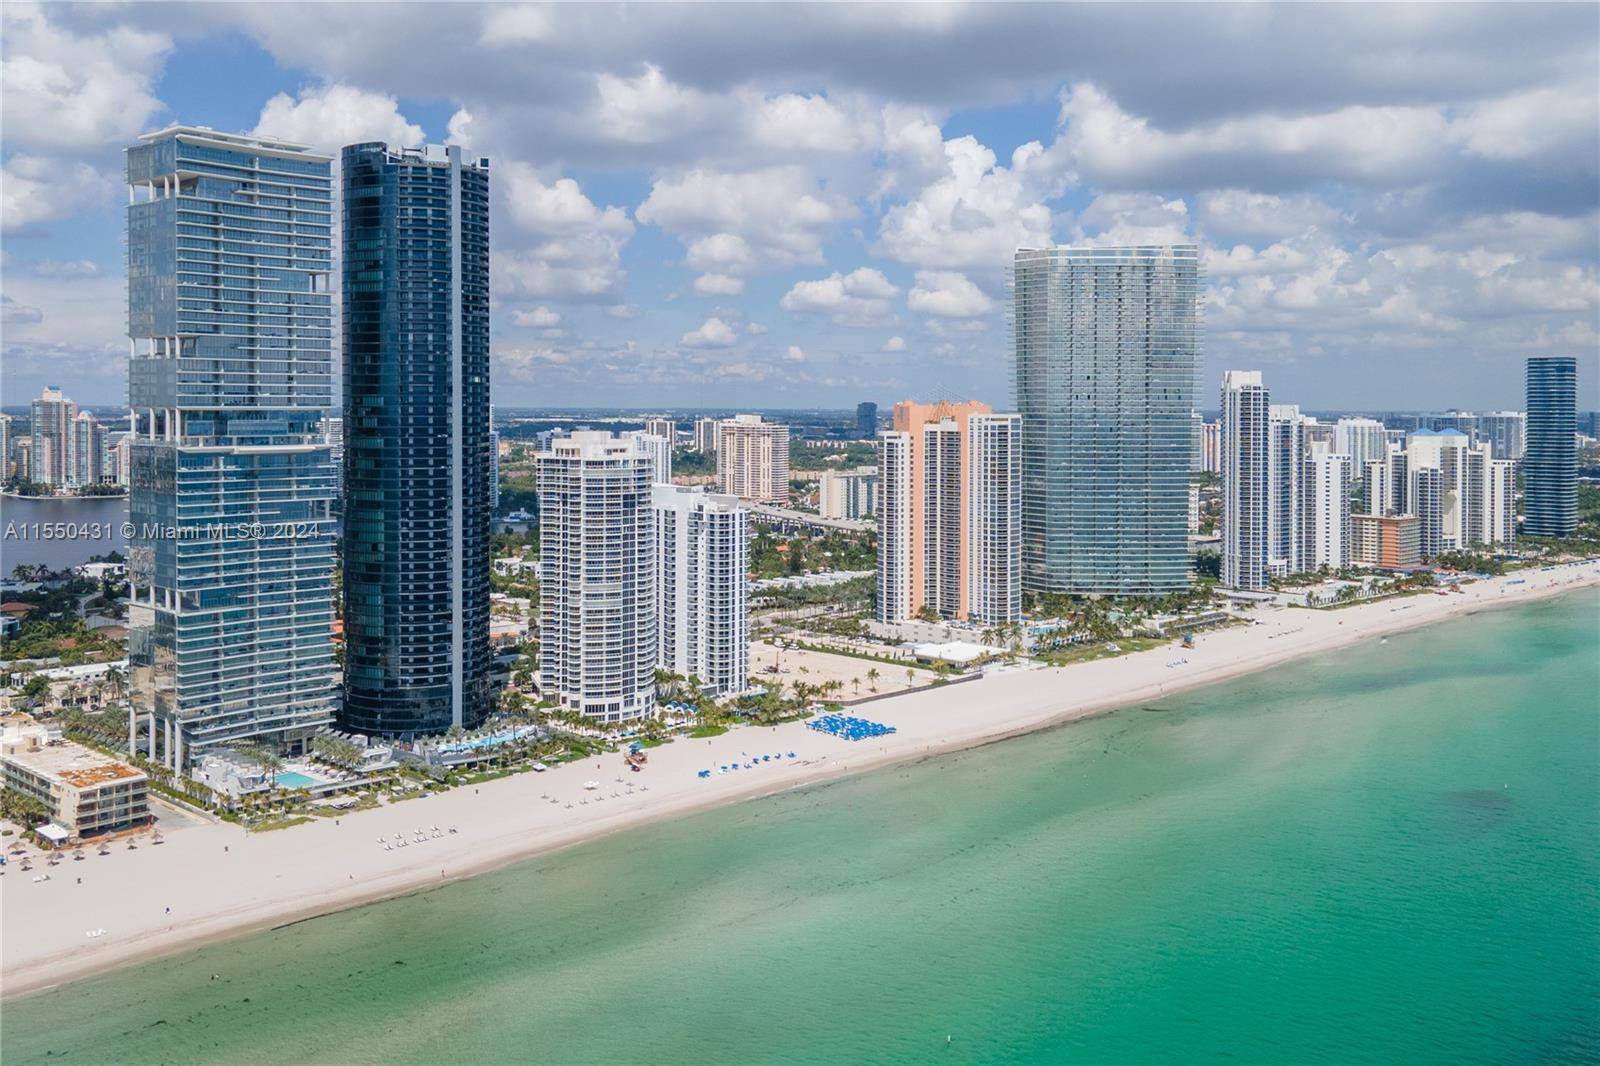 Live at Porsche Design Tower, the most ingenious luxurious residential tower on the ocean in Sunny Isles Beach.